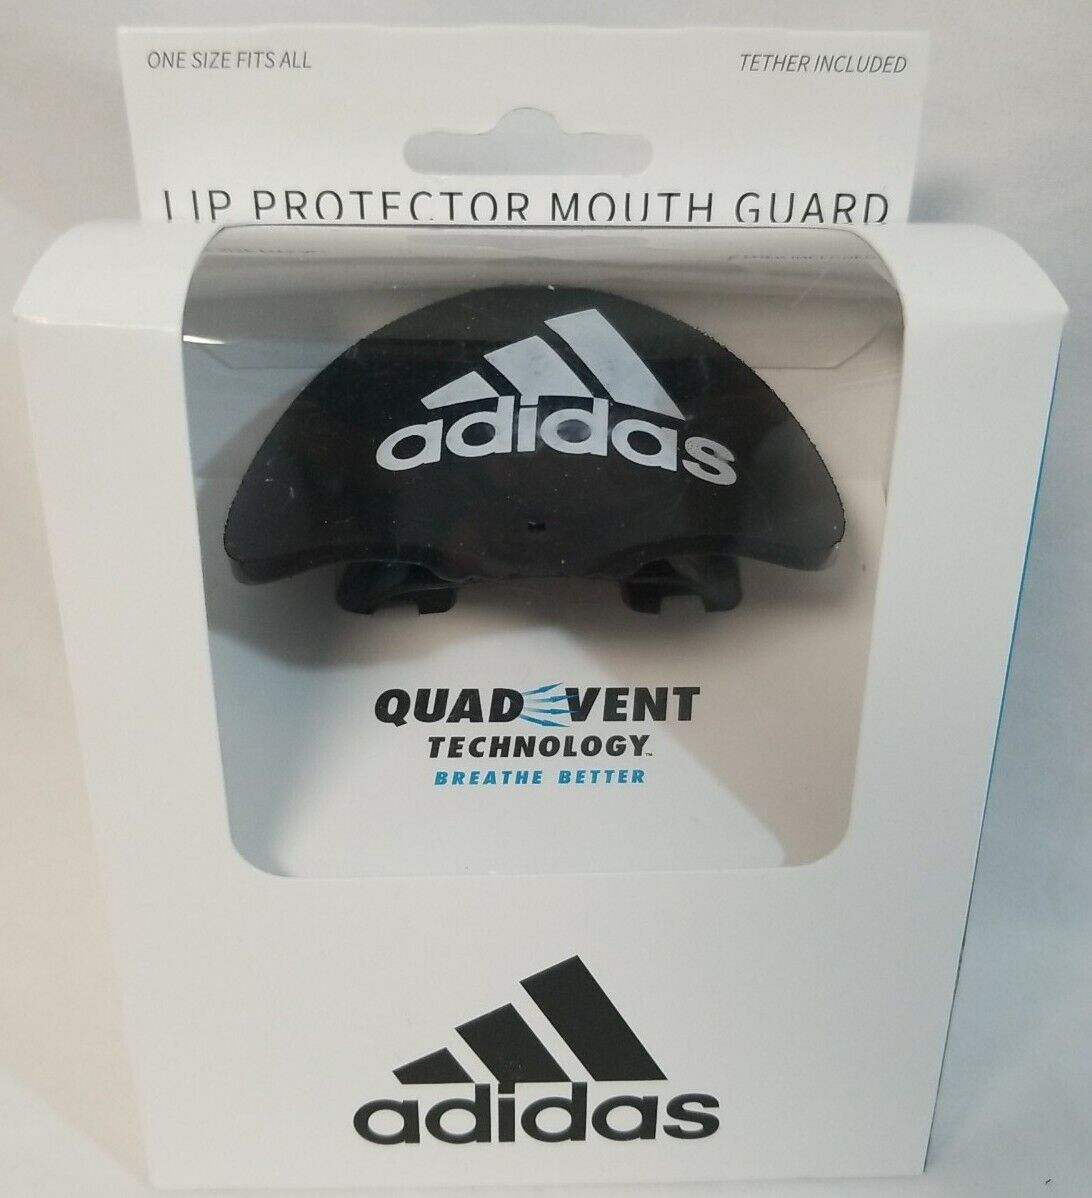 Adidas Black Lip Protector Mouth Guard Tether Included One Size  850003675541 | eBay